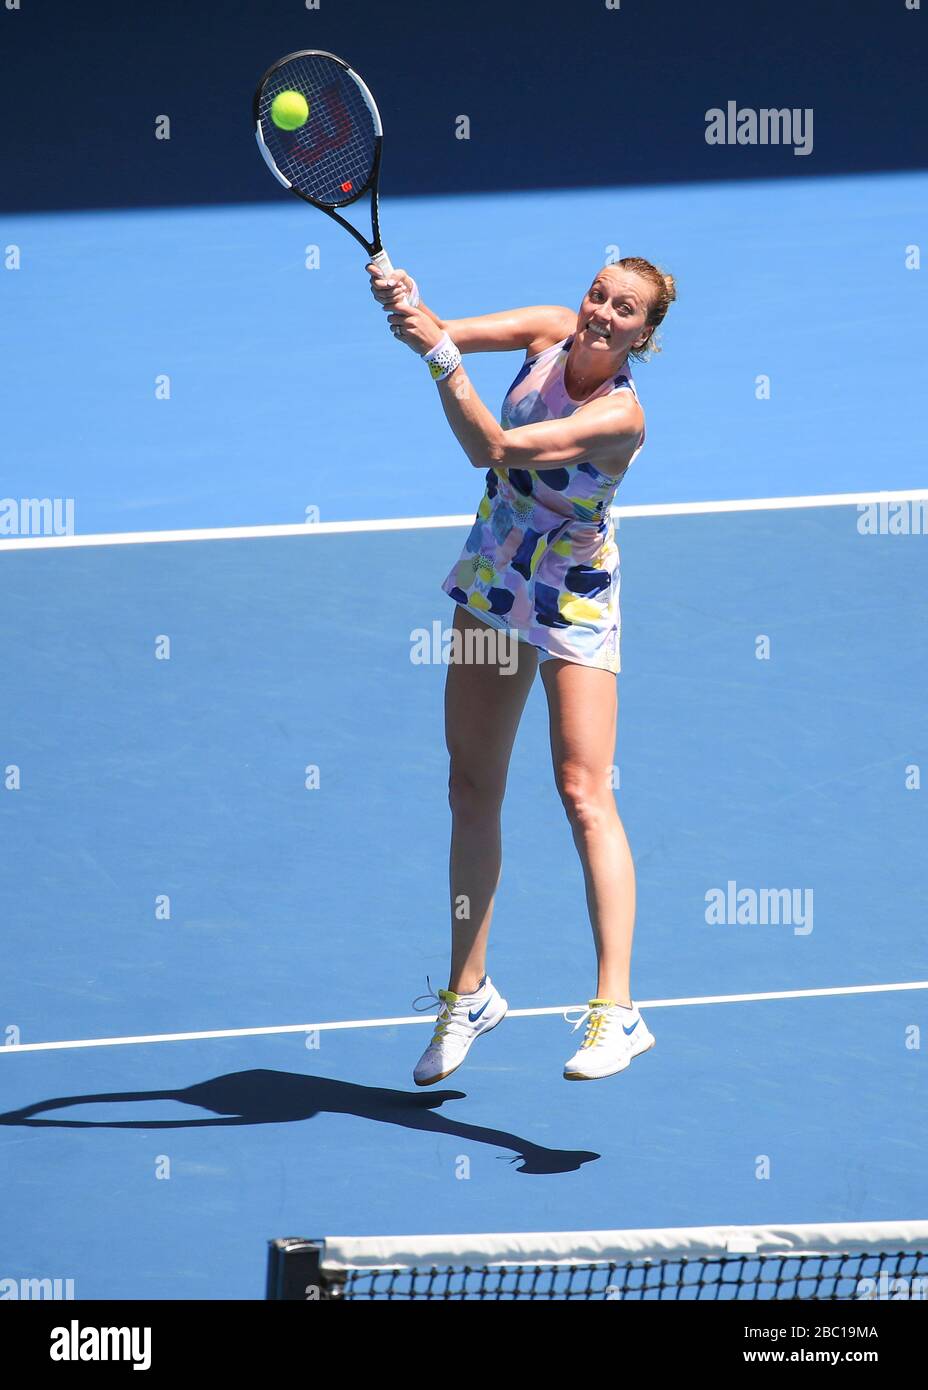 Czech tennis player Petra Kvitova (CZE) playing a high forehand volley during Australian Open 2020 tennis tournament, Melbourne Park, Melbourne, Victo Stock Photo